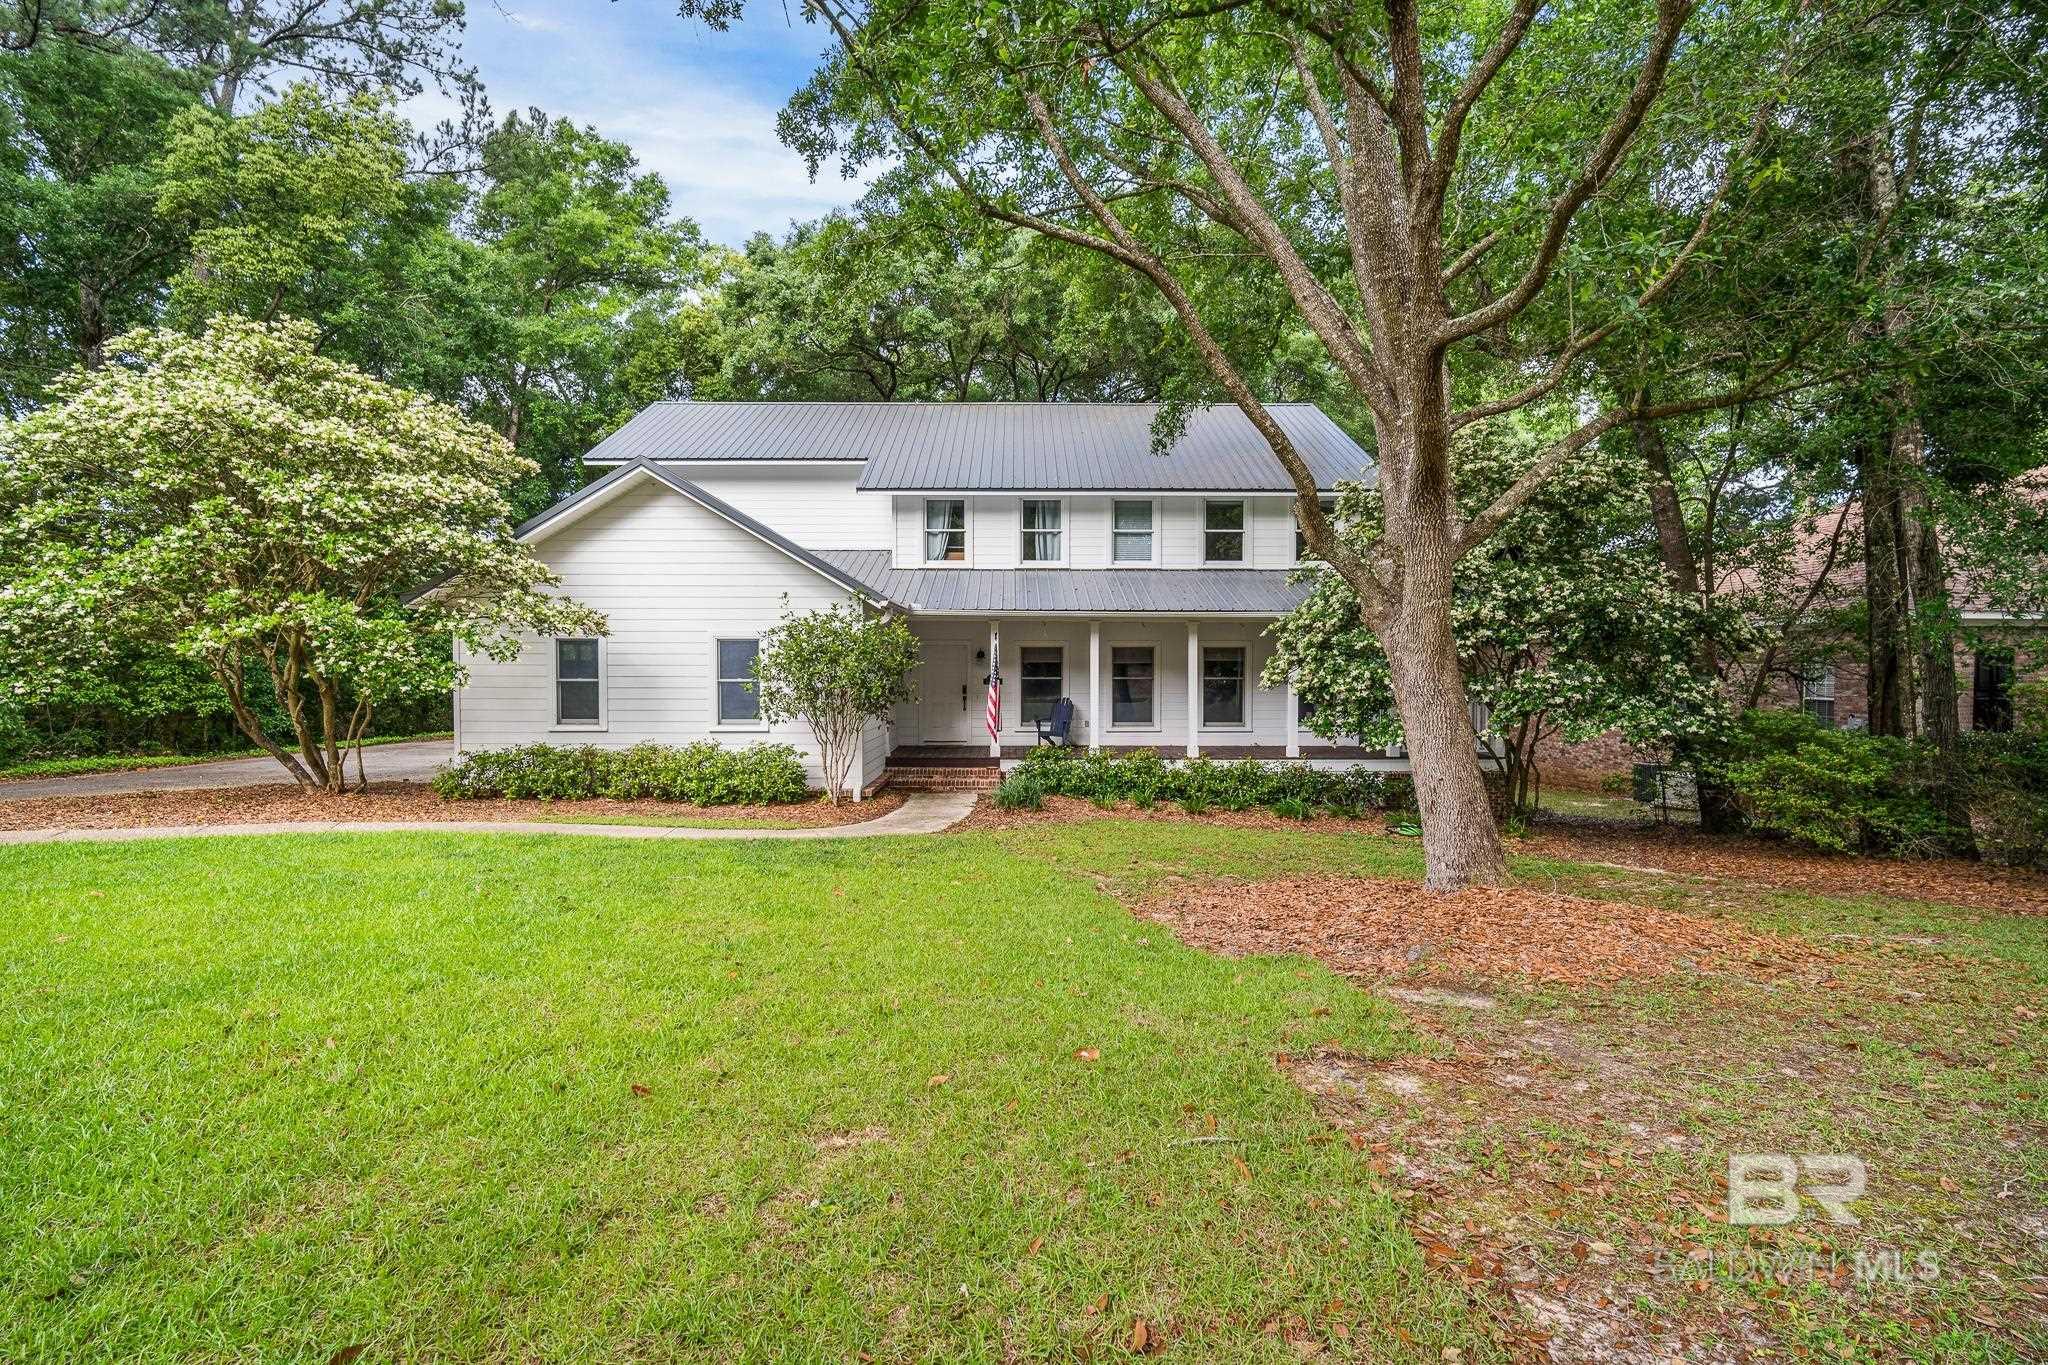 Located in the heart of beautiful downtown Fairhope, this home is Southern charm perfection! Sit a while or welcome your guests on the big, wrap-around front porch where relaxing and sipping sweet tea is a must. Once inside you will find hardwood floors, crown molding and custom wood detailing throughout. The home provides plenty of space for everyone including a living room AND a gathering room with a soaring ceiling and lots of natural light. You will love the kitchen with recent upgrades that include gorgeous granite countertops, tile backsplash and stainless appliances. There is also plenty of storage in the walk-in pantry, complete with custom shelving. On the main floor you will find the laundry room, located right off the garage and a lovely, updated half bath. The spacious primary bedroom is also located on the main level, and it too has hardwood floors and an updated bath with dual sinks, granite countertops and a custom tiled shower with bench. It also has its own private entrance to the back porch. Once upstairs, you will love the bonus/flex space that could be an office, sitting area or reading nook. There are four additional bedrooms upstairs, along with two additional full baths. Don't forget about the wonderful & private outdoor space in the back, complete with an open and screened porch. Both spaces are perfect for relaxing and enjoying the fenced yard and beautiful mature trees. This home has a newer metal roof and both HVAC systems have been upgraded in the last few years. It is conveniently located on a quiet cul-de-sac and it's only a short trip to all things Fairhope. If this sounds right up your alley, don't wait because it won't be available long!